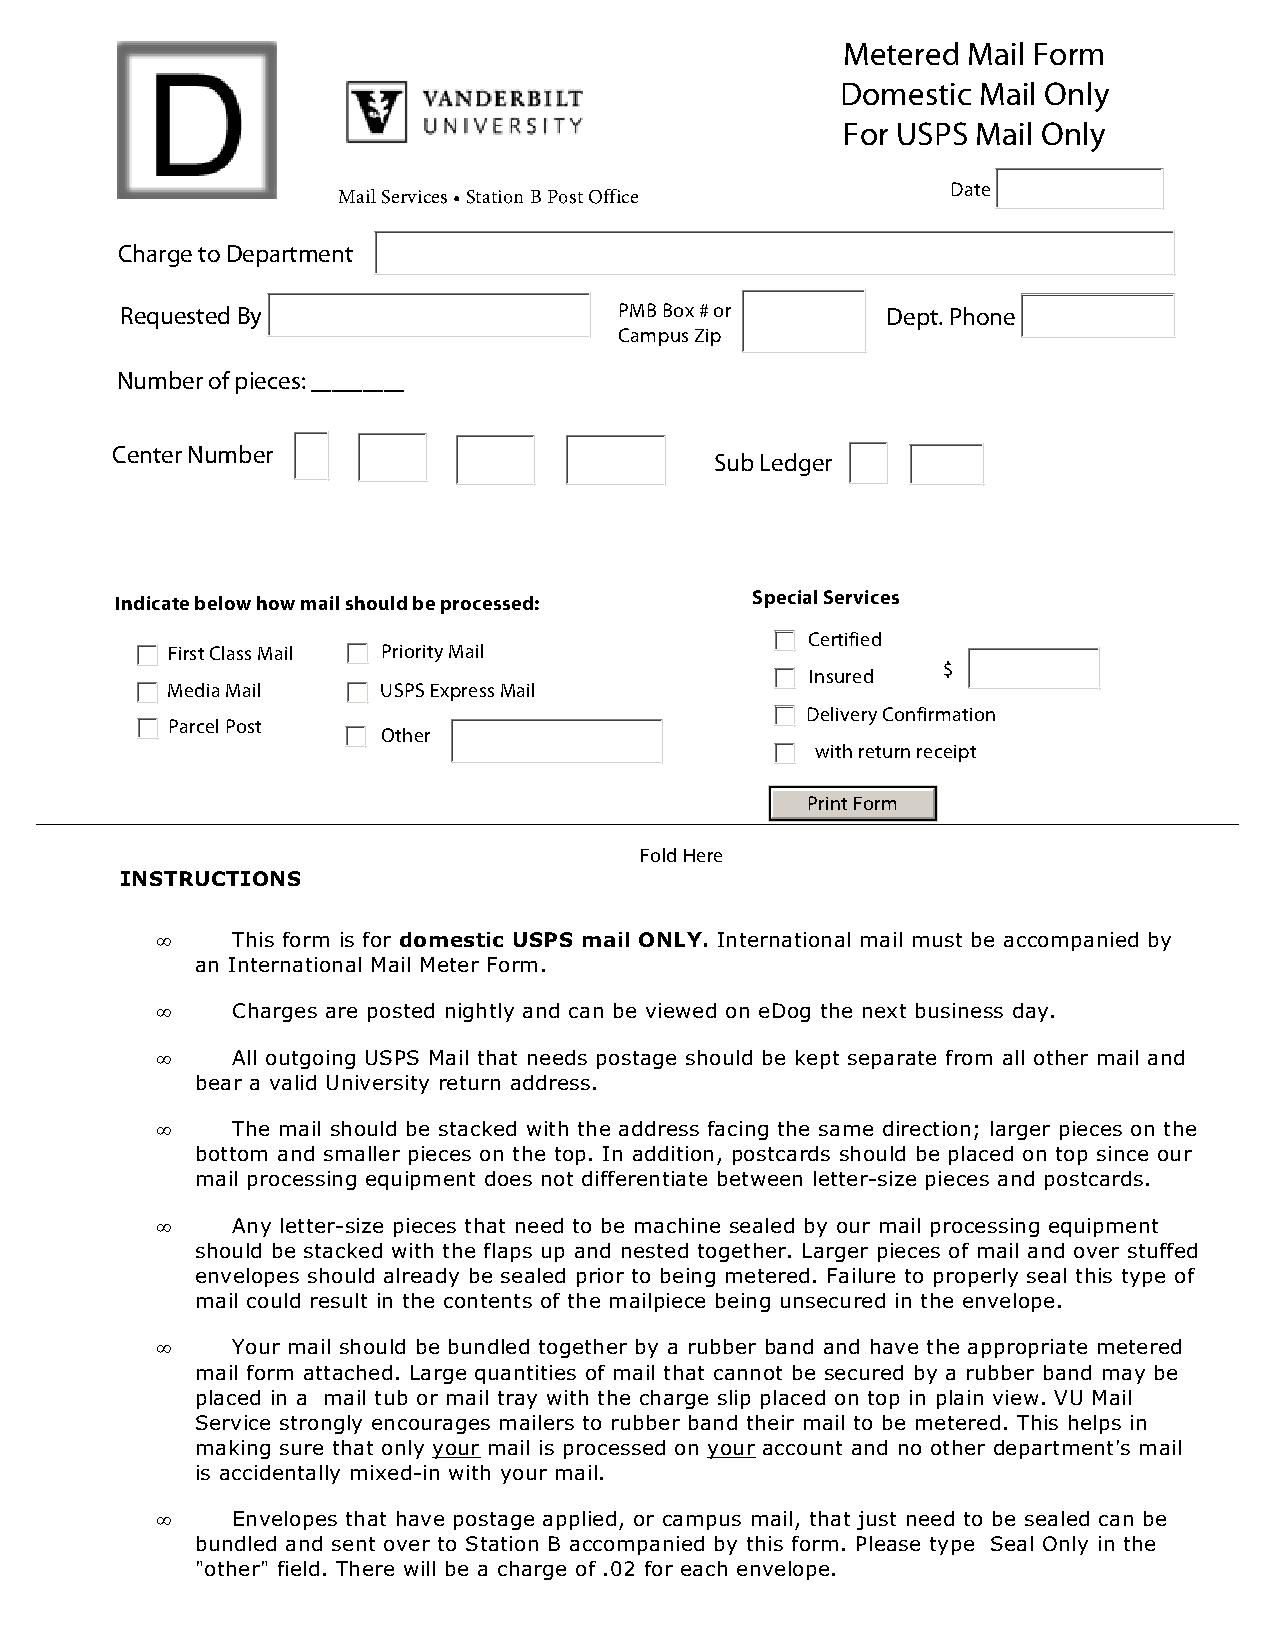 Domestic mail form